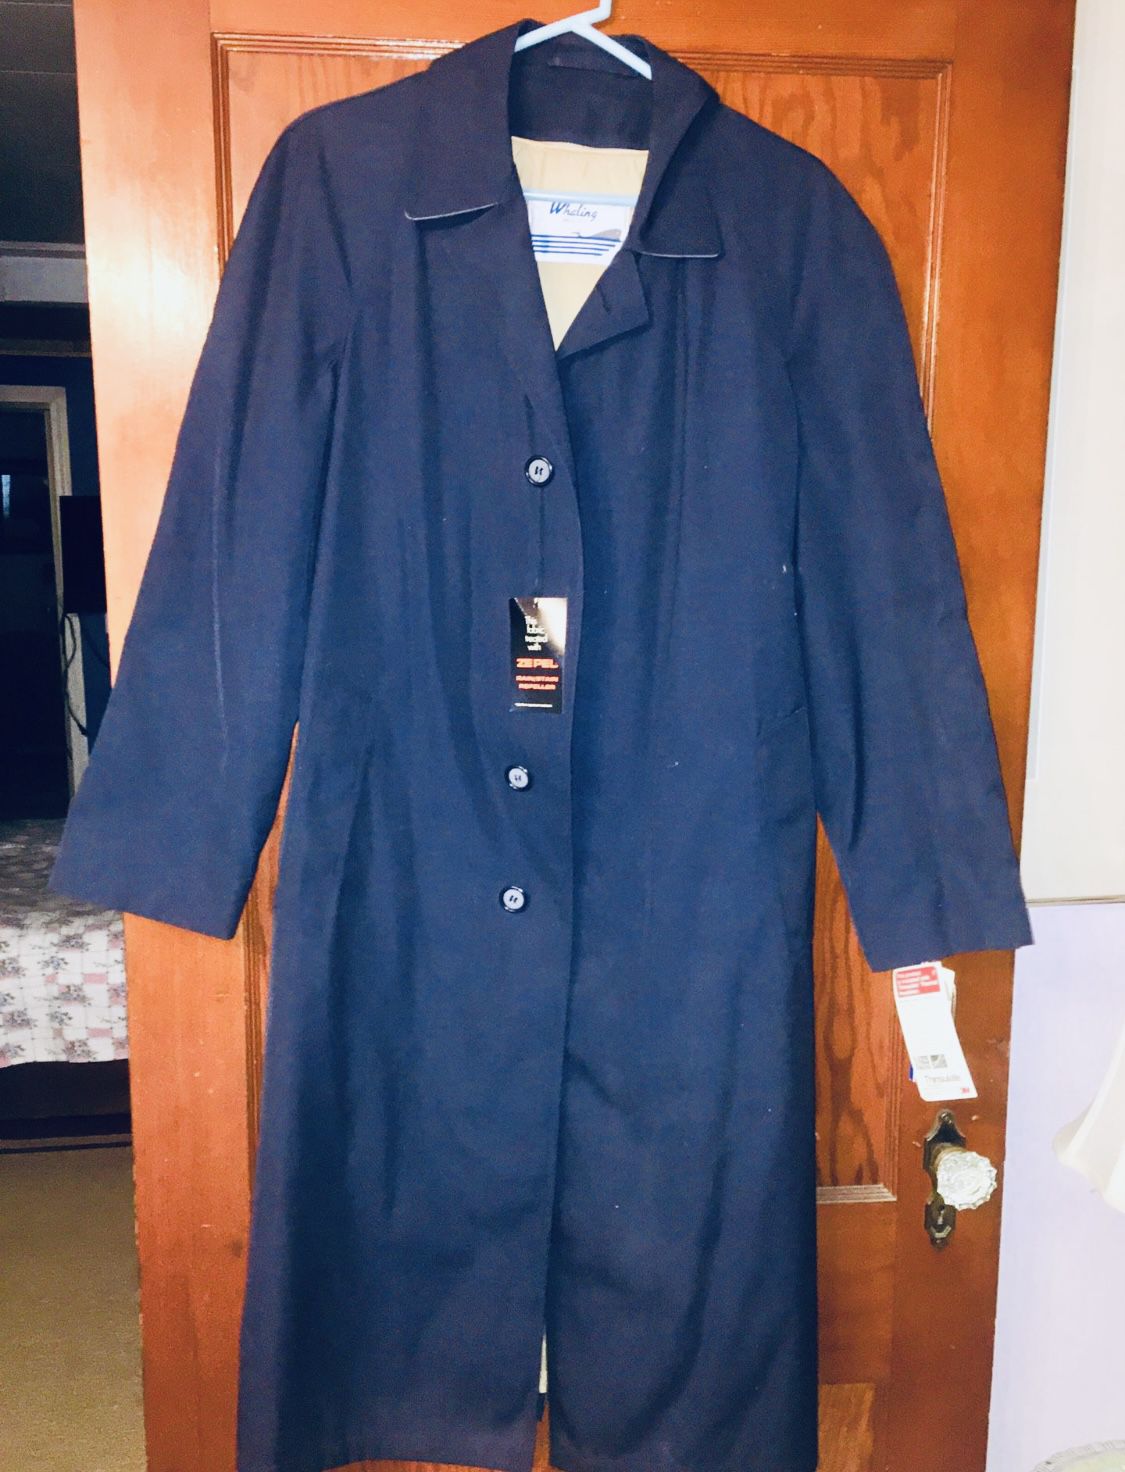 TRENCH COAT FULL LENGHT RAIN/SNOW  By WHALING COMPANY - NEW SLL TAGS STILL ATTACHED SIZE 36 REGULAR IN NAVY BLUE RAIN REPELLENT THIN-INSULATED  